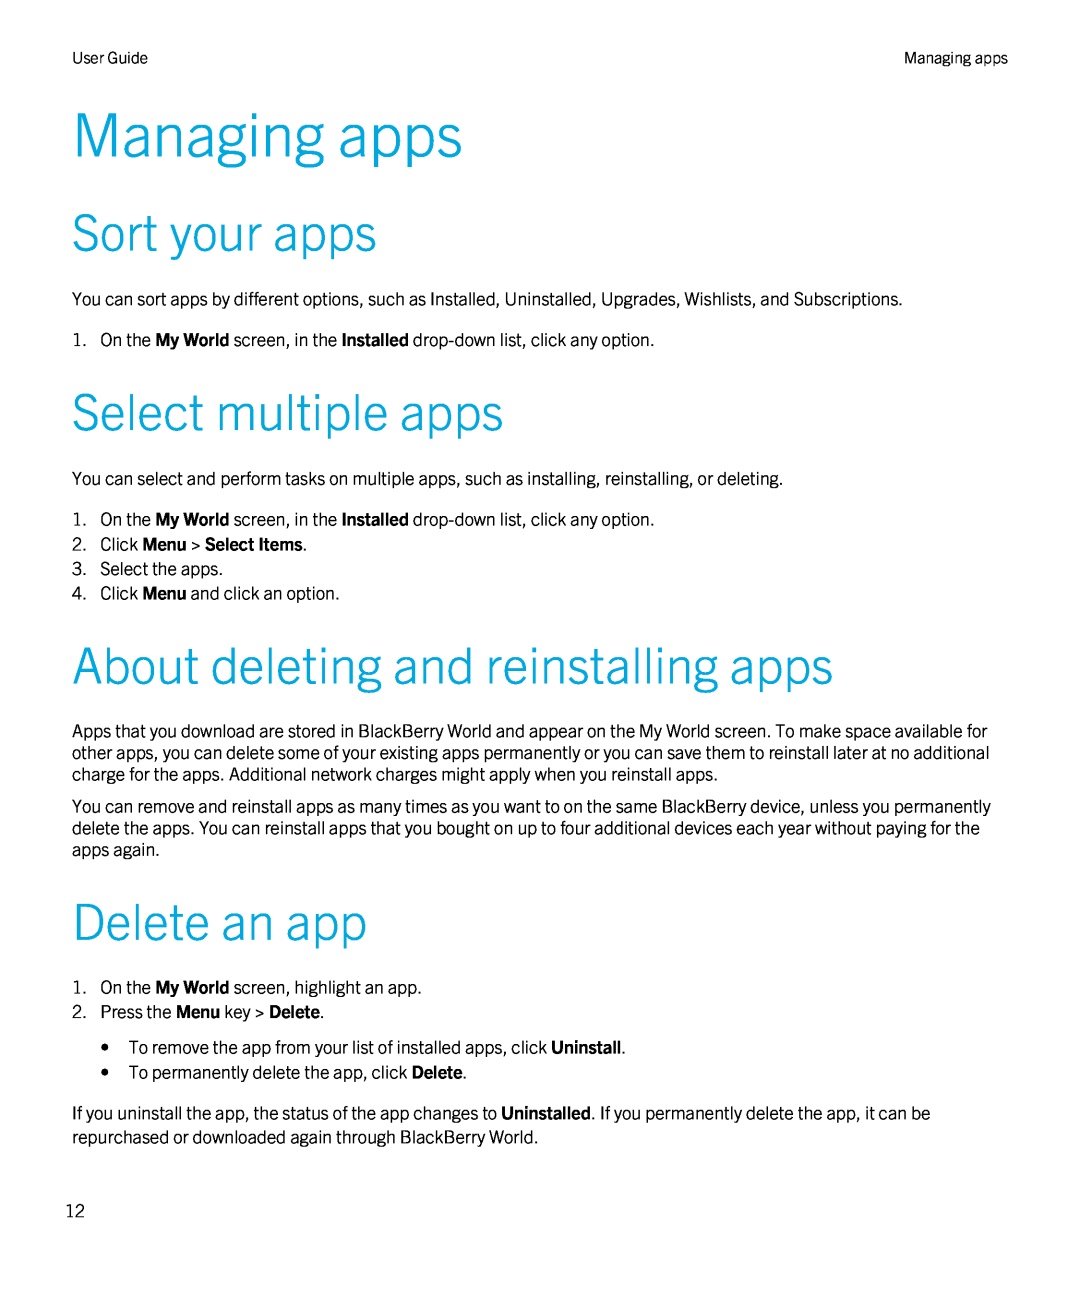 Blackberry 4.3 Managing apps, Sort your apps, Select multiple apps, About deleting and reinstalling apps, Delete an app 